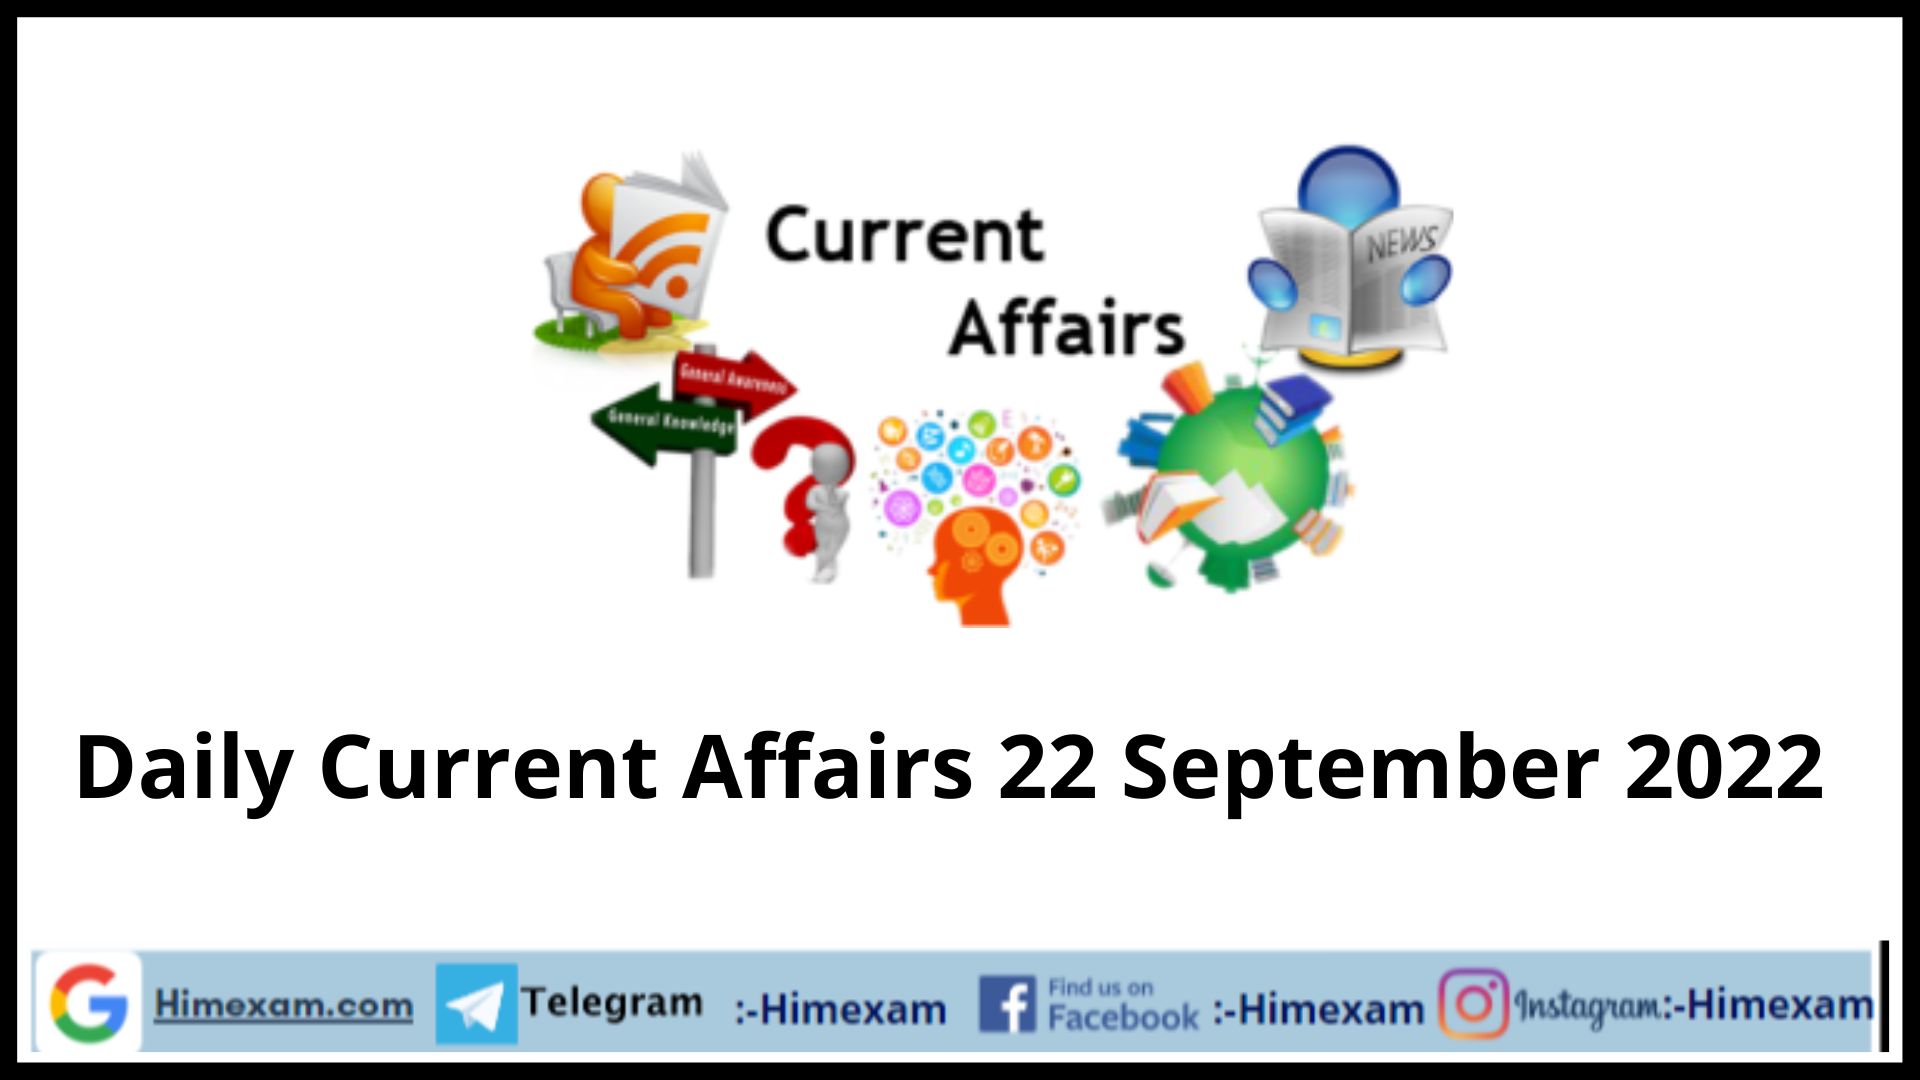 Daily Current Affairs 22 September 2022